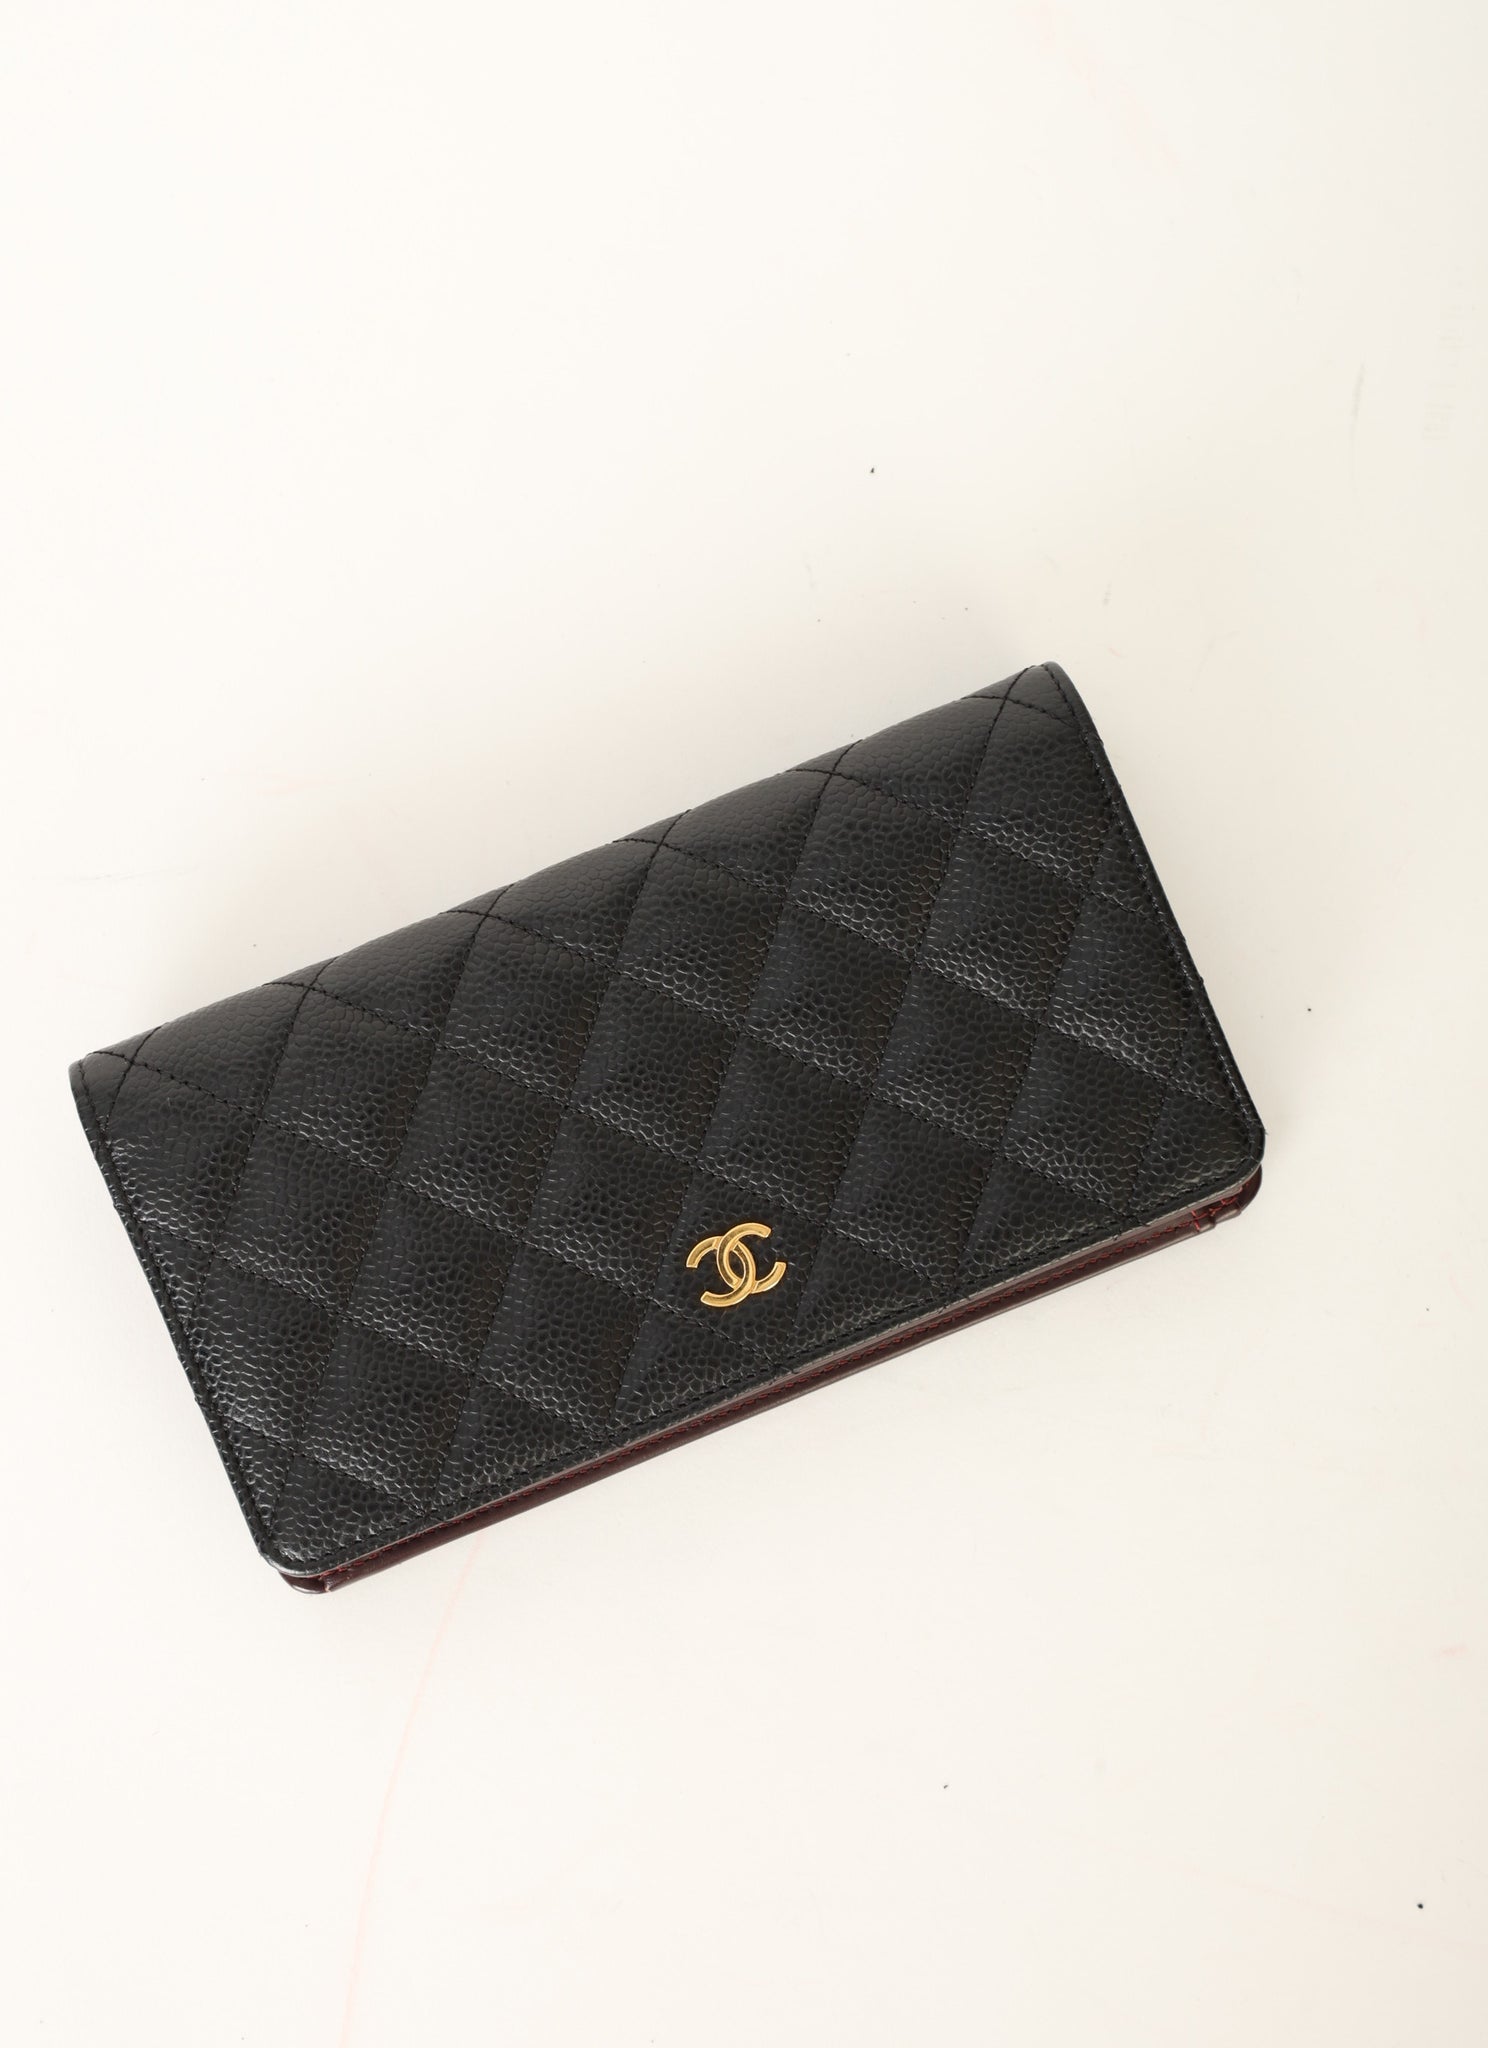 Chanel 2014 Caviar Wallet with Chain